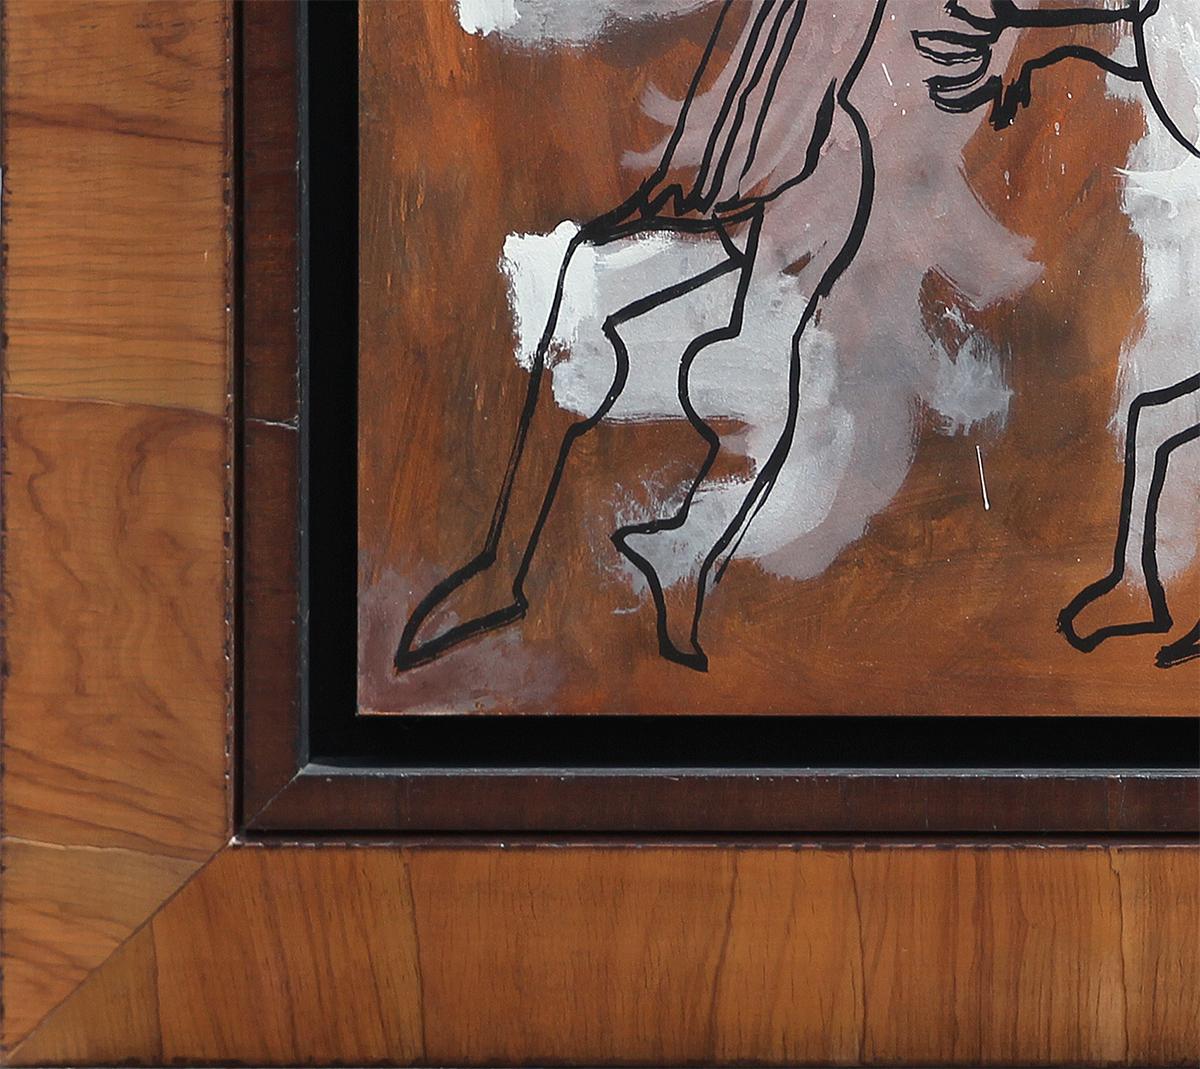 Modern neutral toned painting of three abstract figures by Cuban artist René Portocarrero. The work features a black outline of three dancing Carnival figures set against broad white and brown strokes. Signed and dated in front lower right corner.